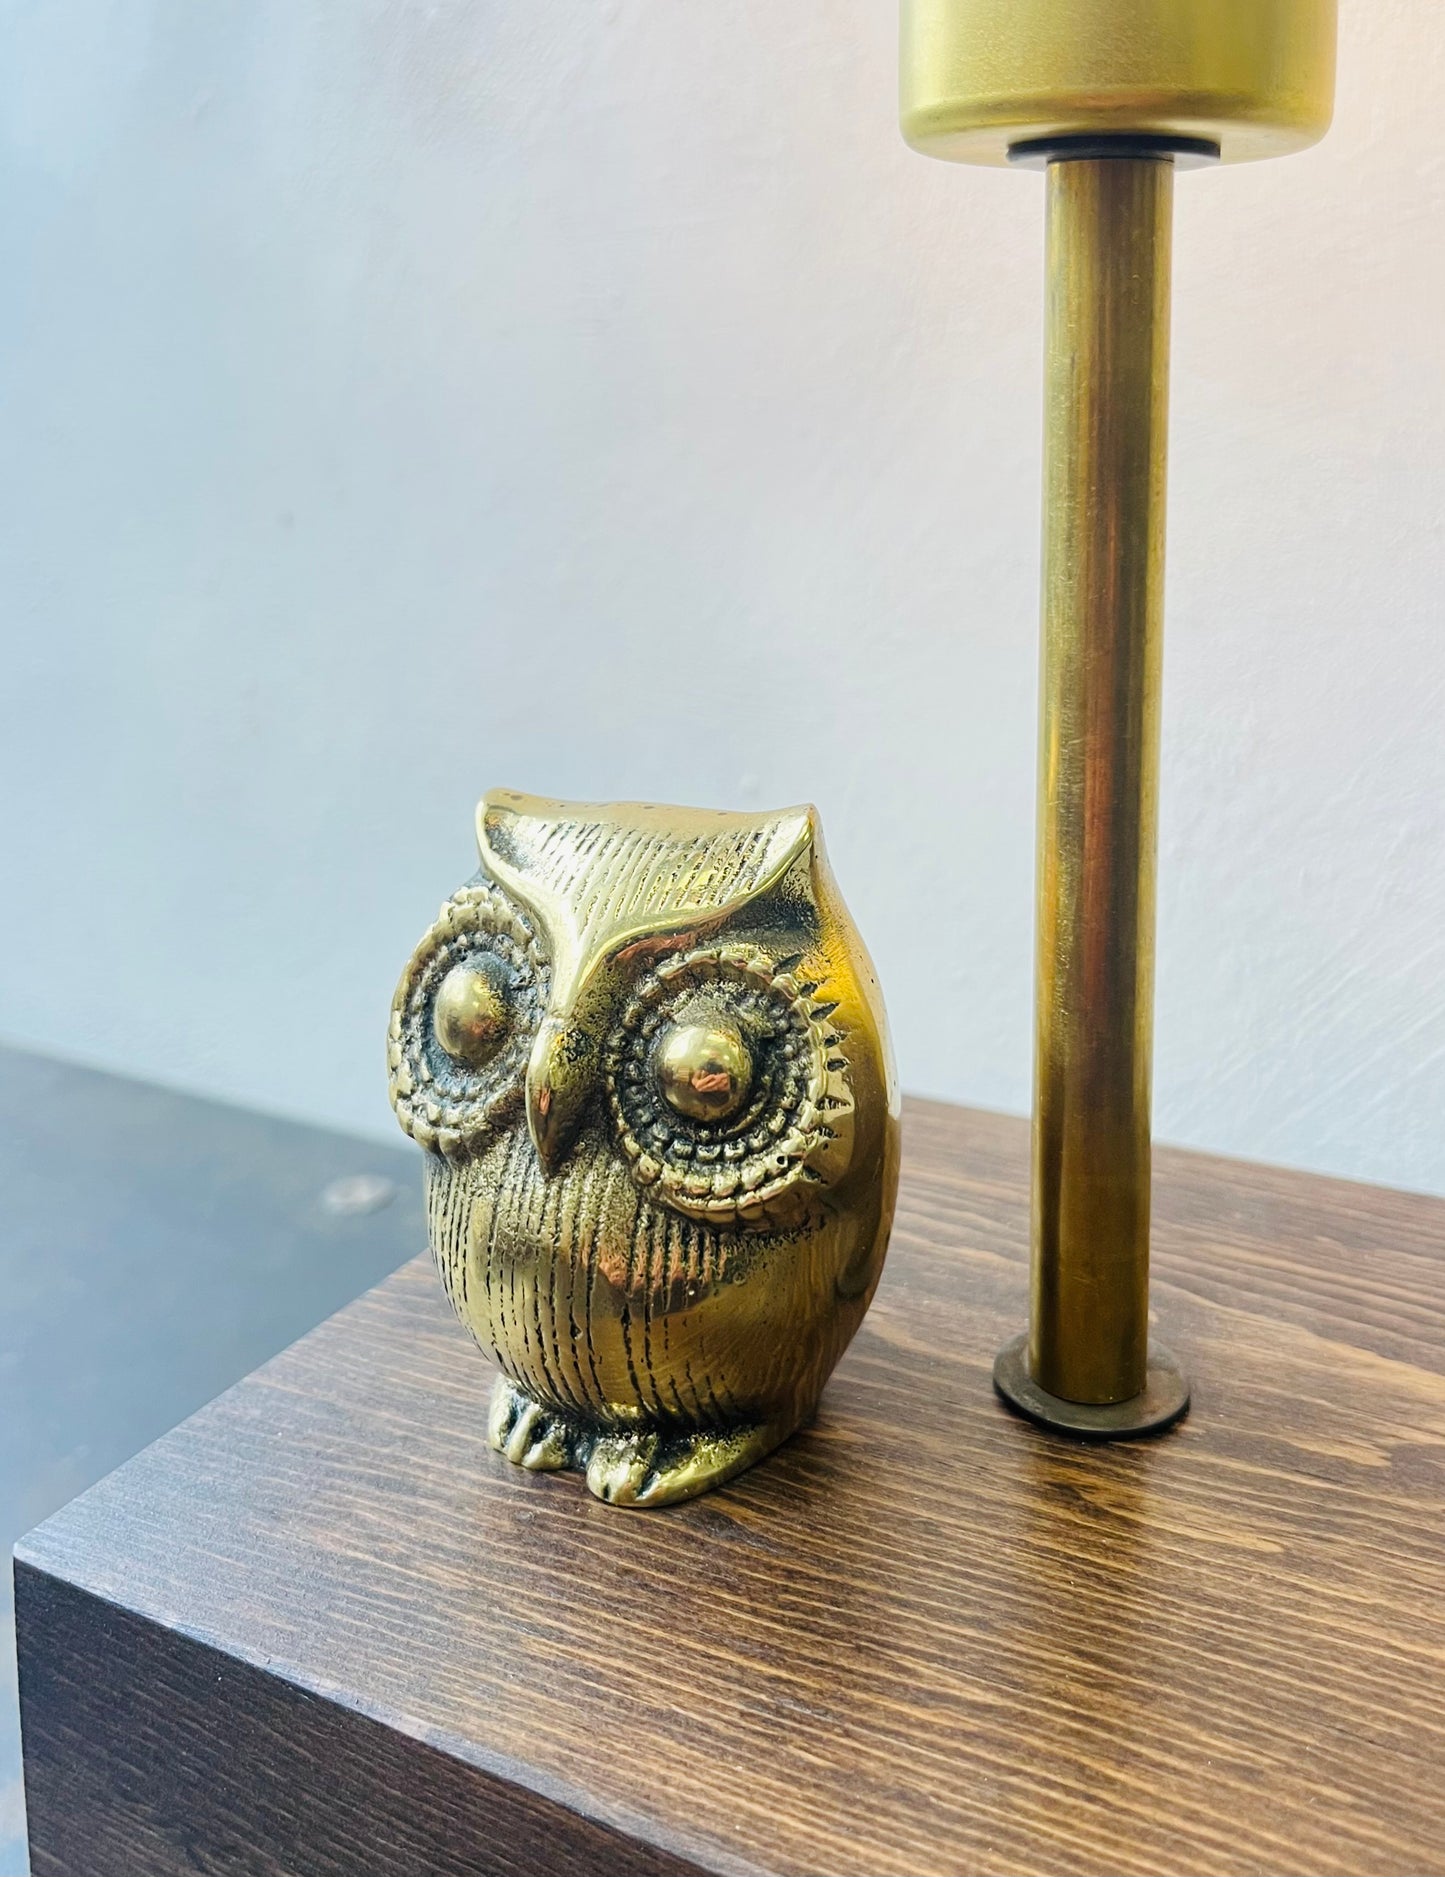 Mr. Owl (PAIR) // Touch-Controlled (Mirrored PAIR)